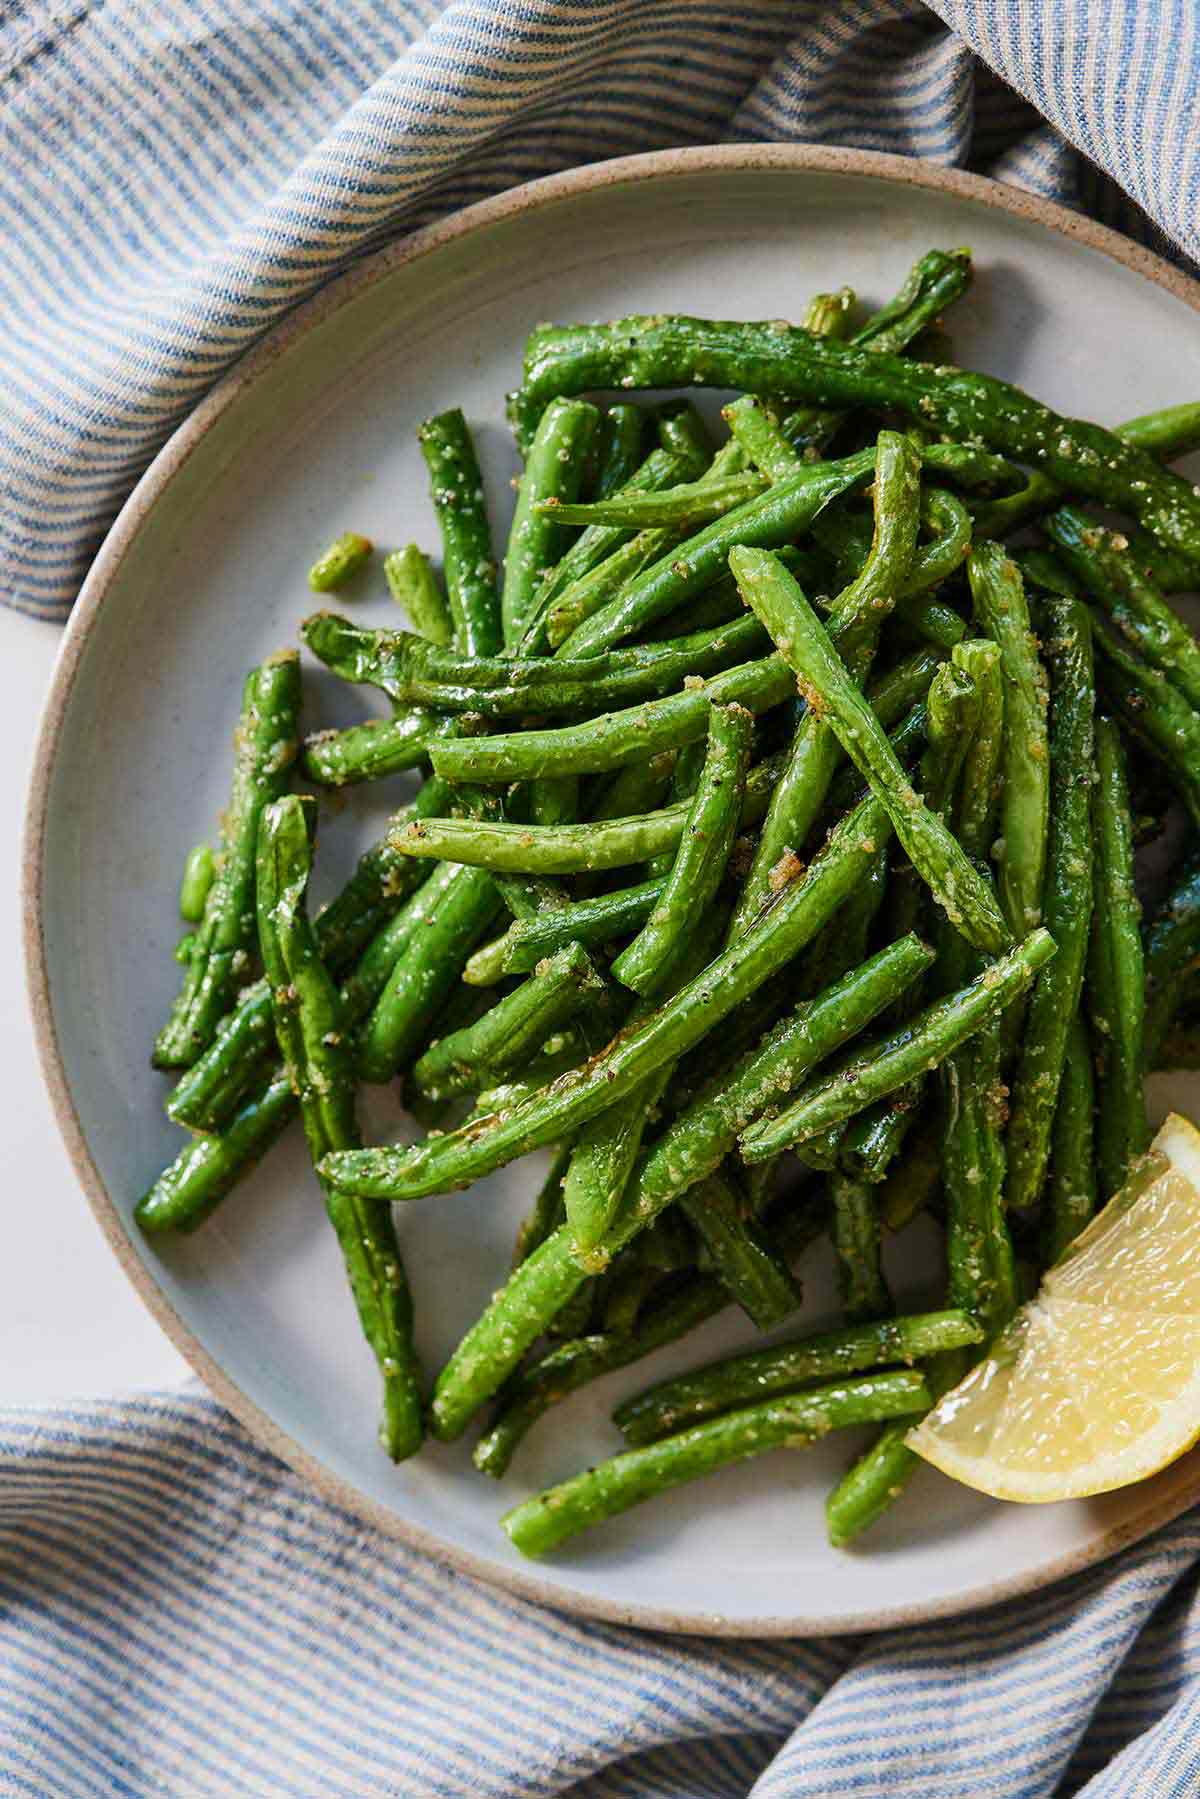 Overhead view of a plate of air fryer green beans with a lemon wedge surrounded by a blue striped linen napkin.